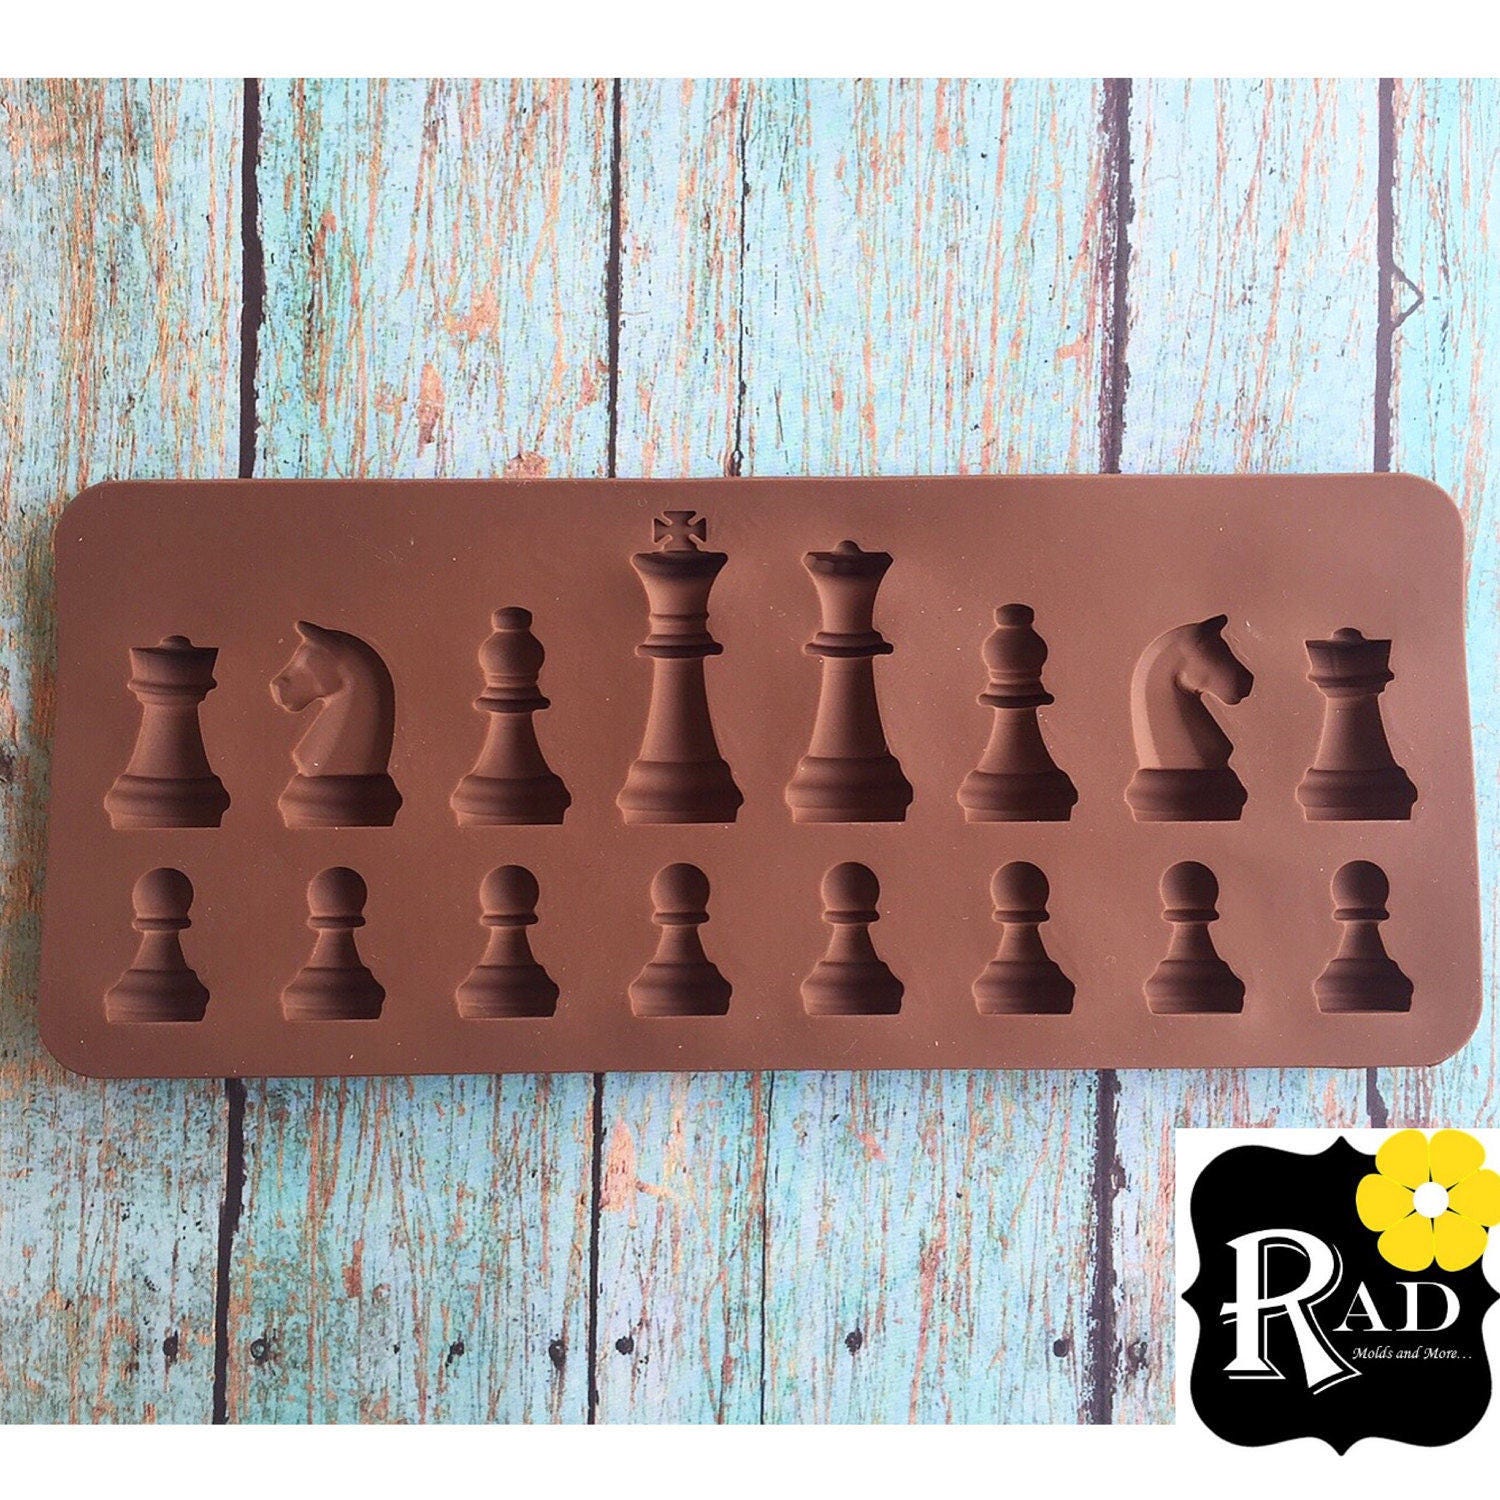 3D Chess Mold, Chess Silicone Mold, Silicone Chess Pieces Resin